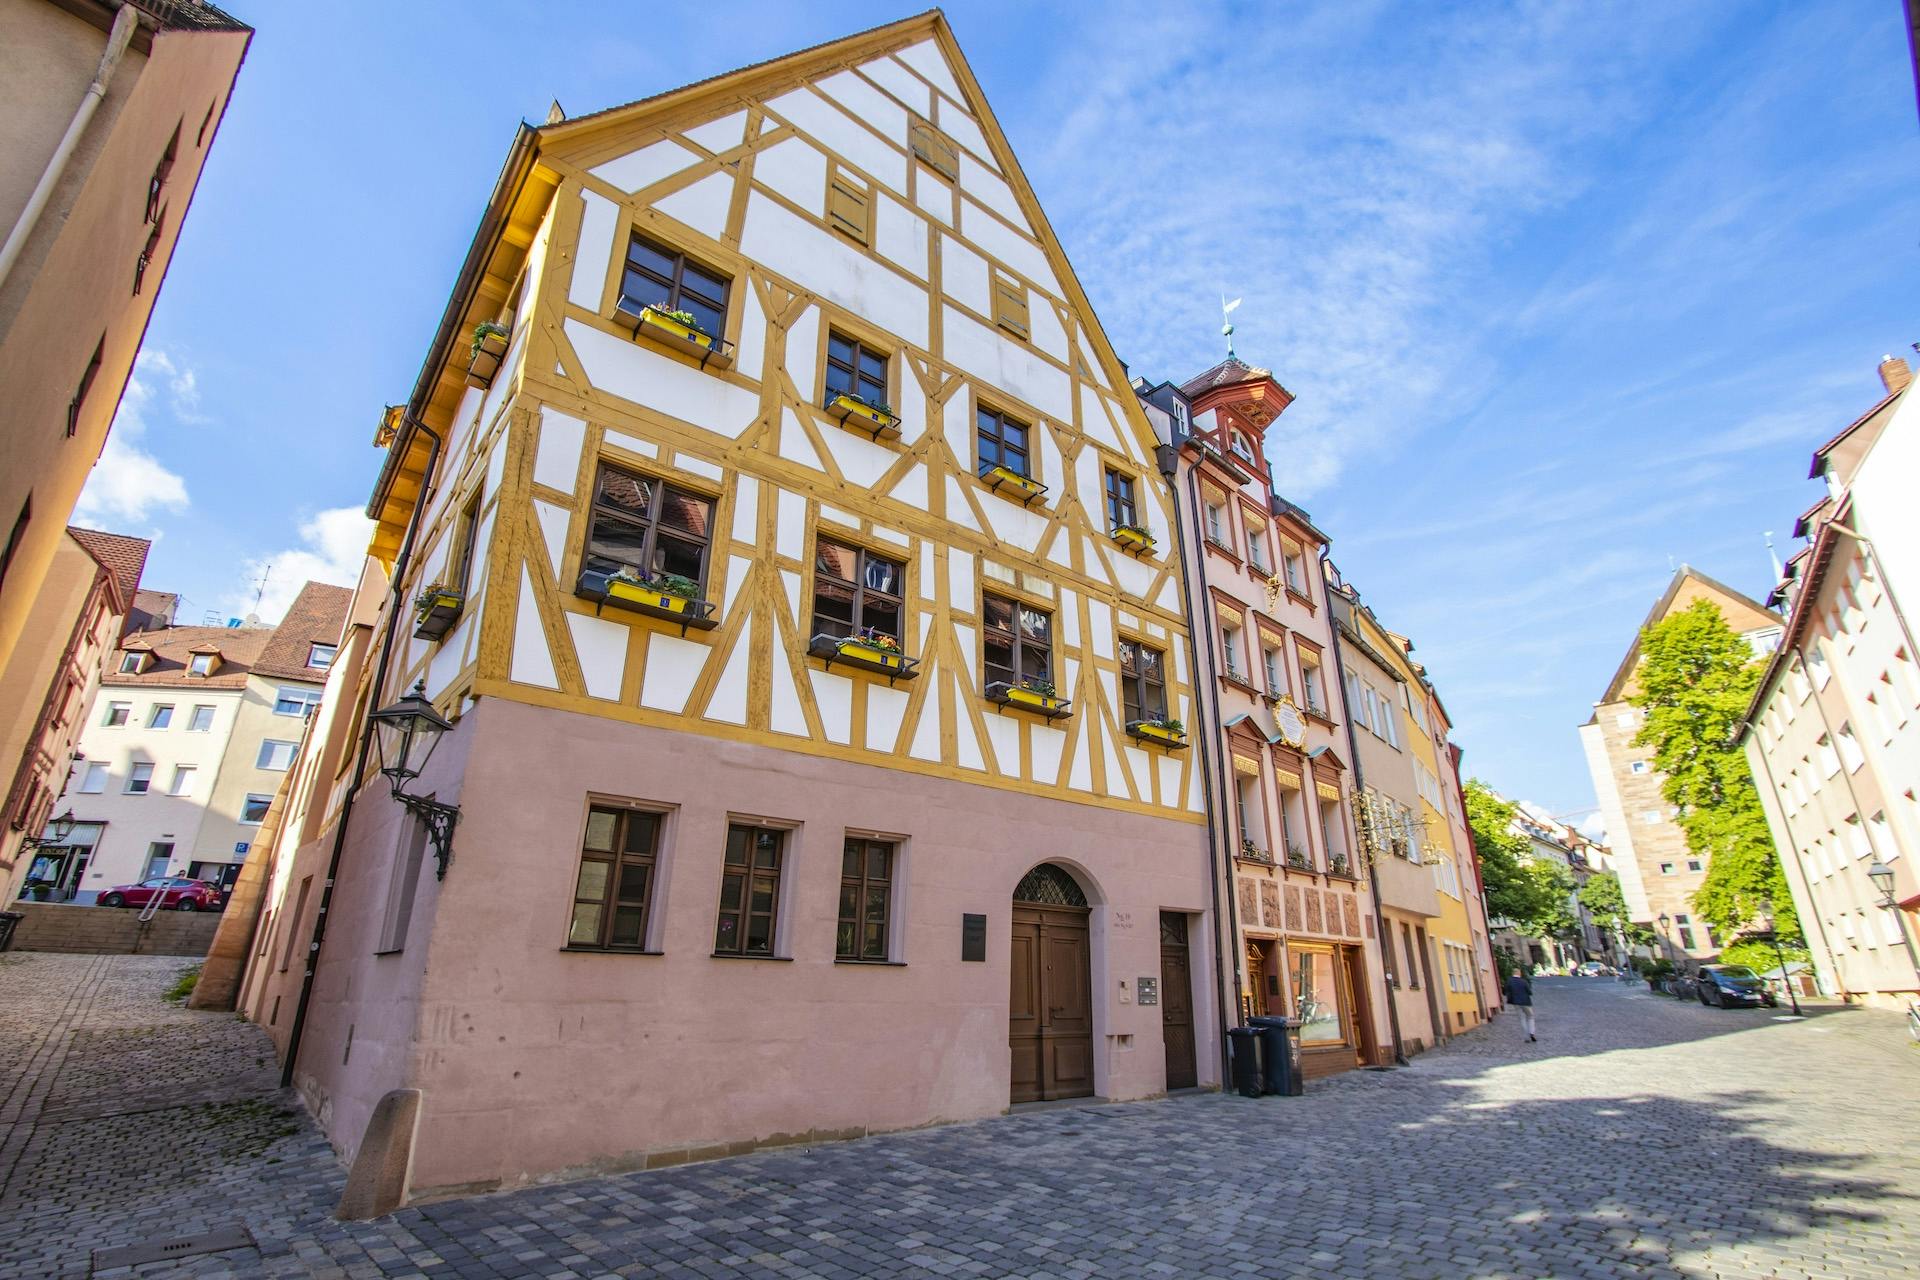 Discover Nuremberg’s art and culture with a Local Musement